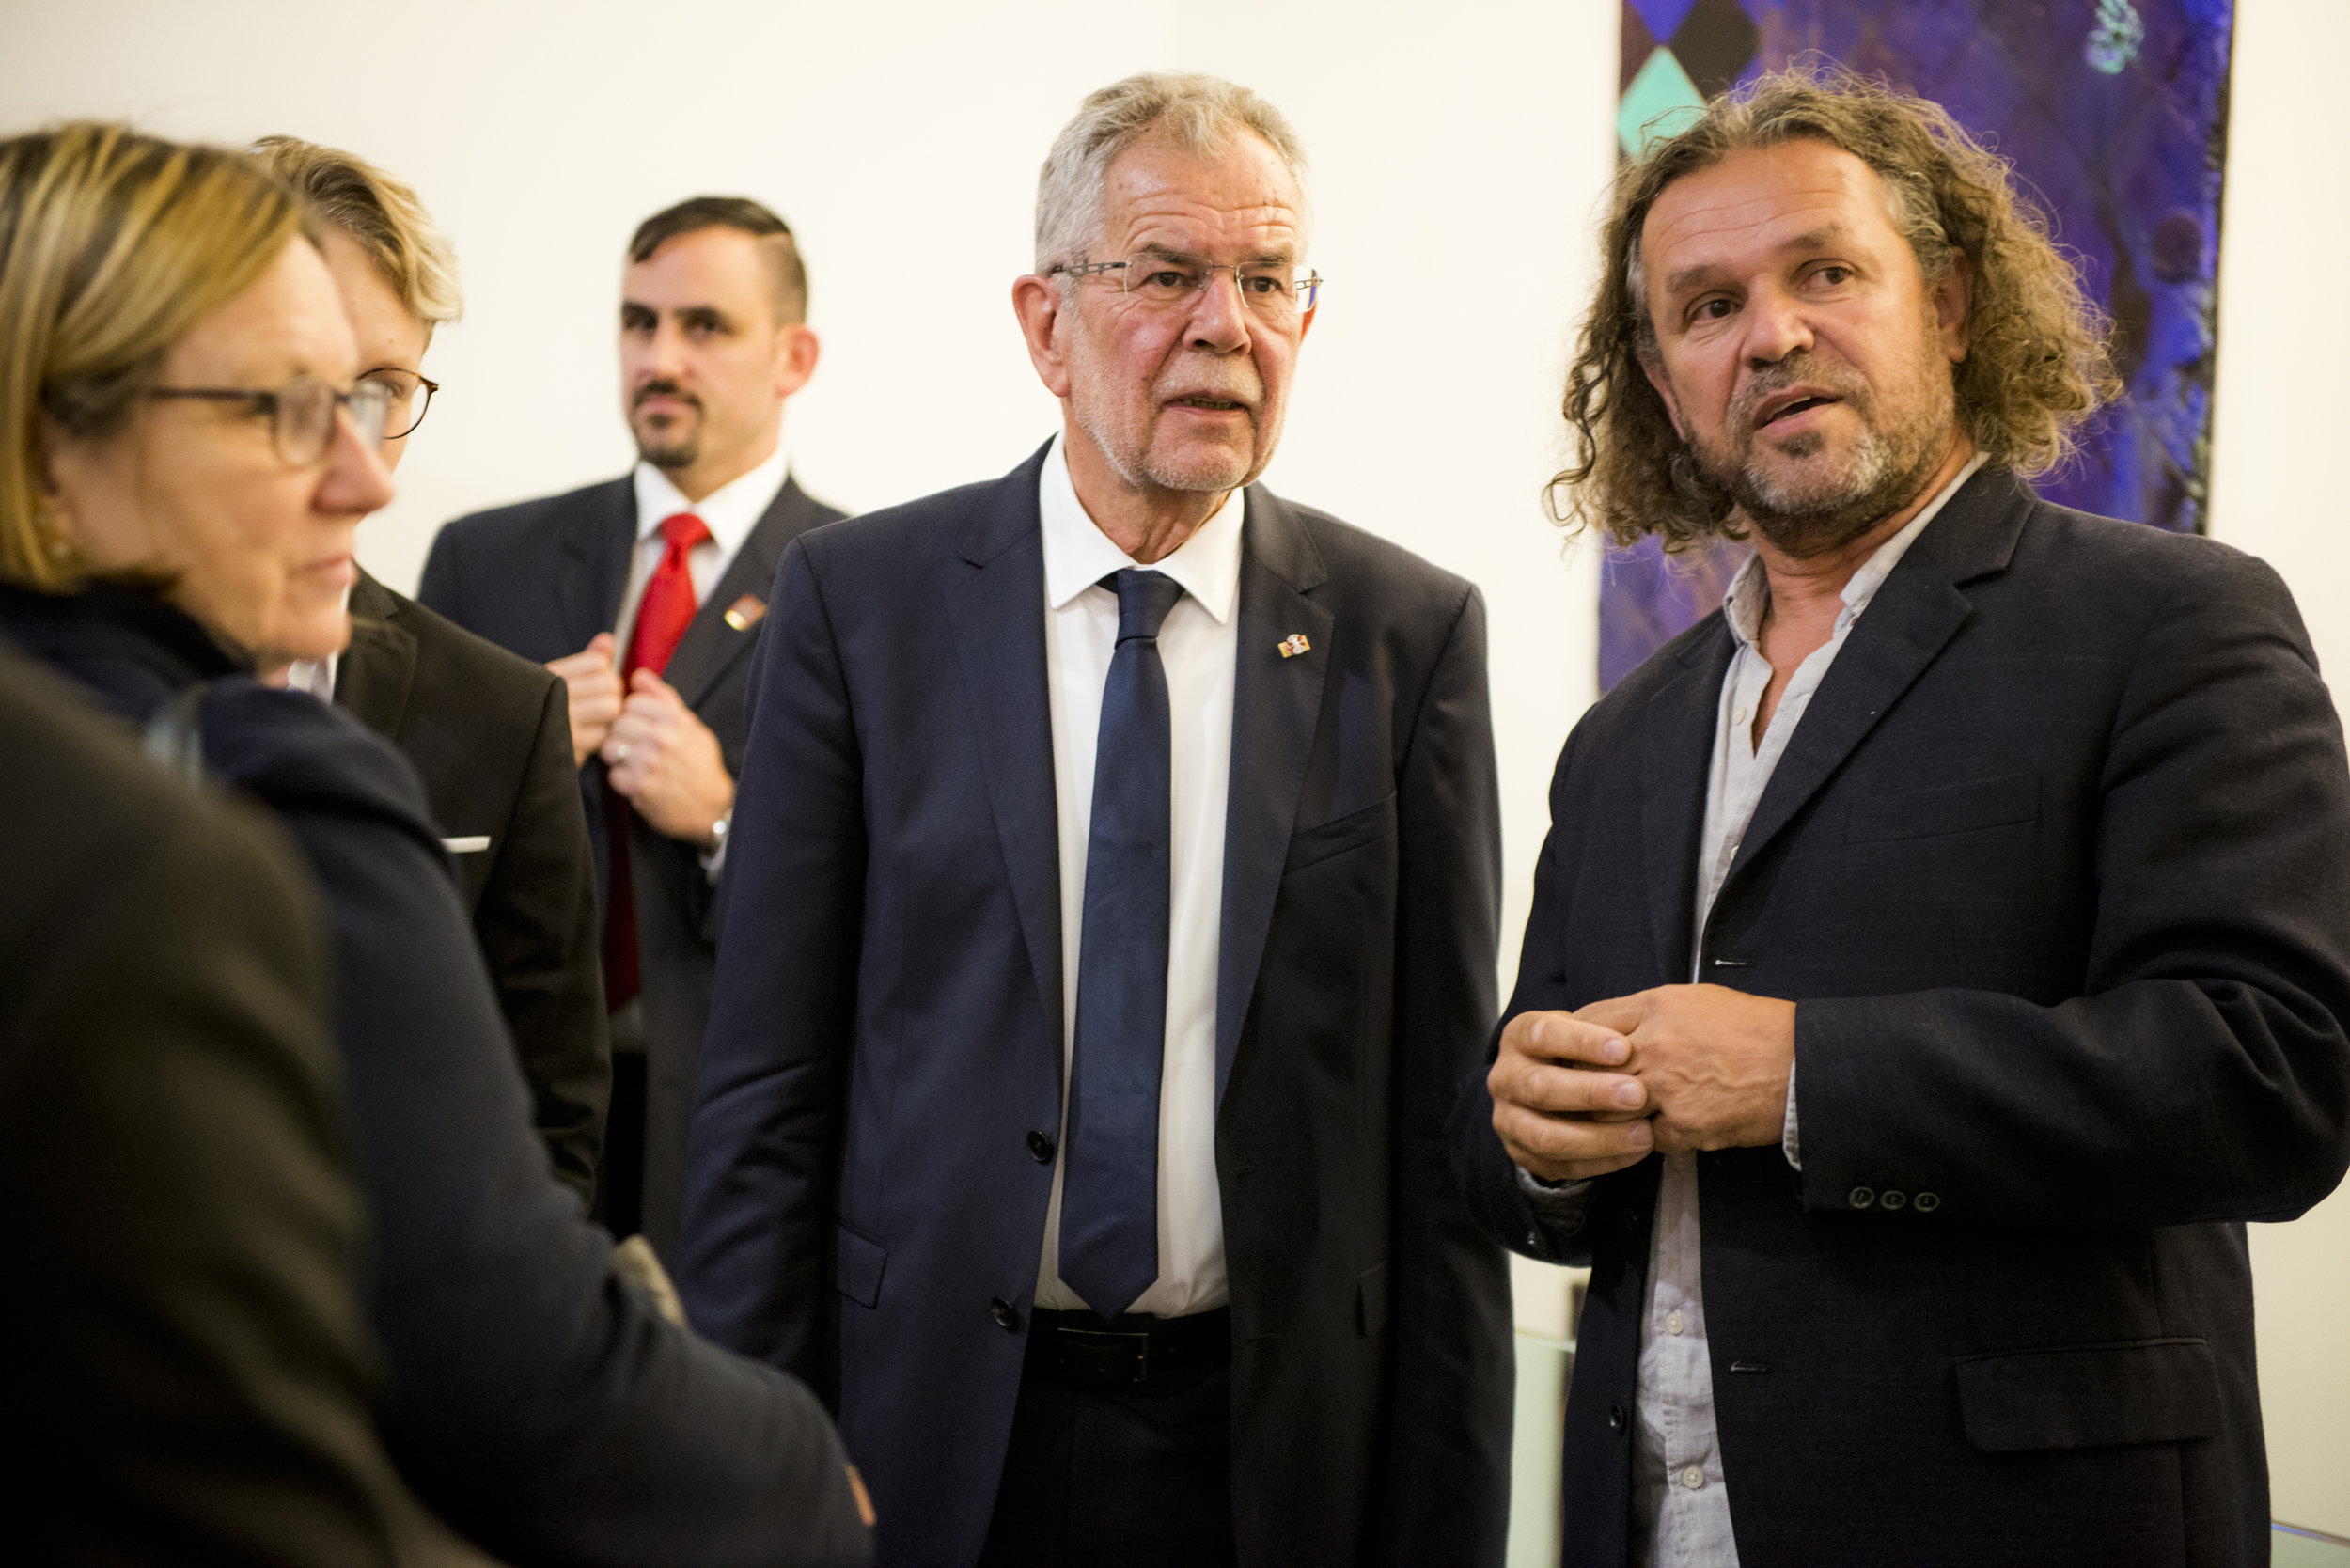  President Alexander Van der Bellen (center) with curator Andreas Reiter Raabe (right) at the &nbsp;WILD WEST  Opening Reception, September 19, 2017, at the Austrian Cultural Forum New York, Photo: David Plakke/ACFNY 